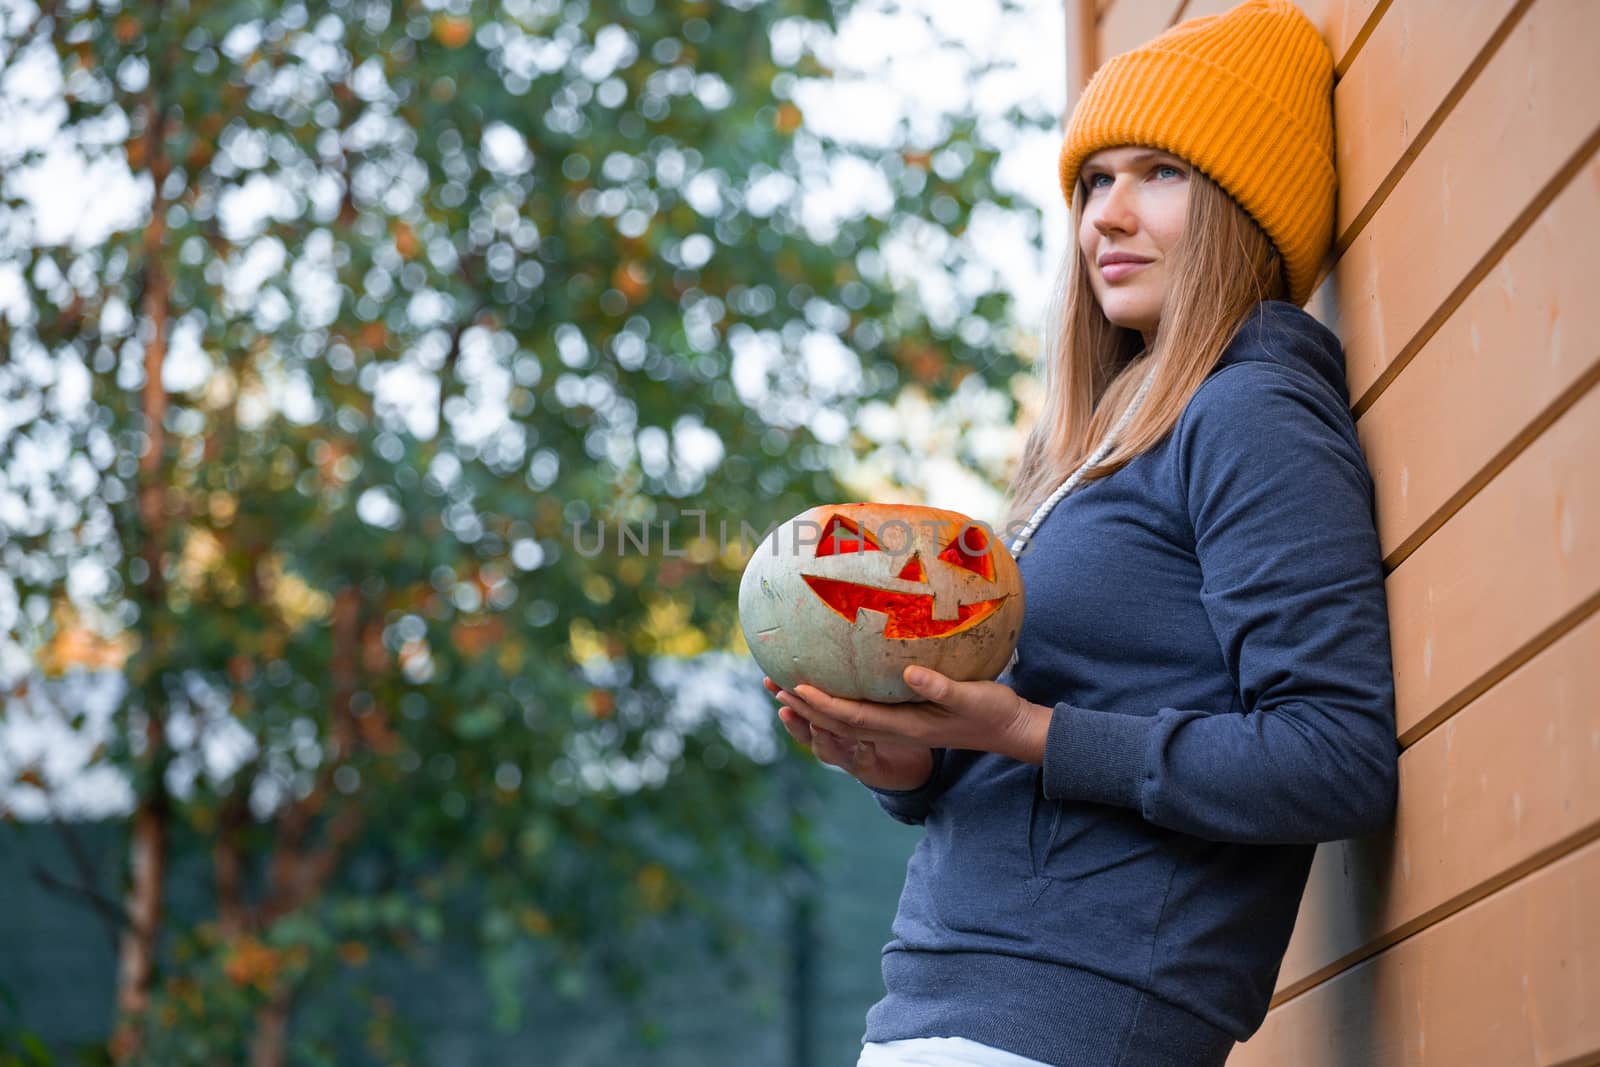 Woman in casual clothes and hat holding Halloween pumpkin over orange wall background with copy space for text